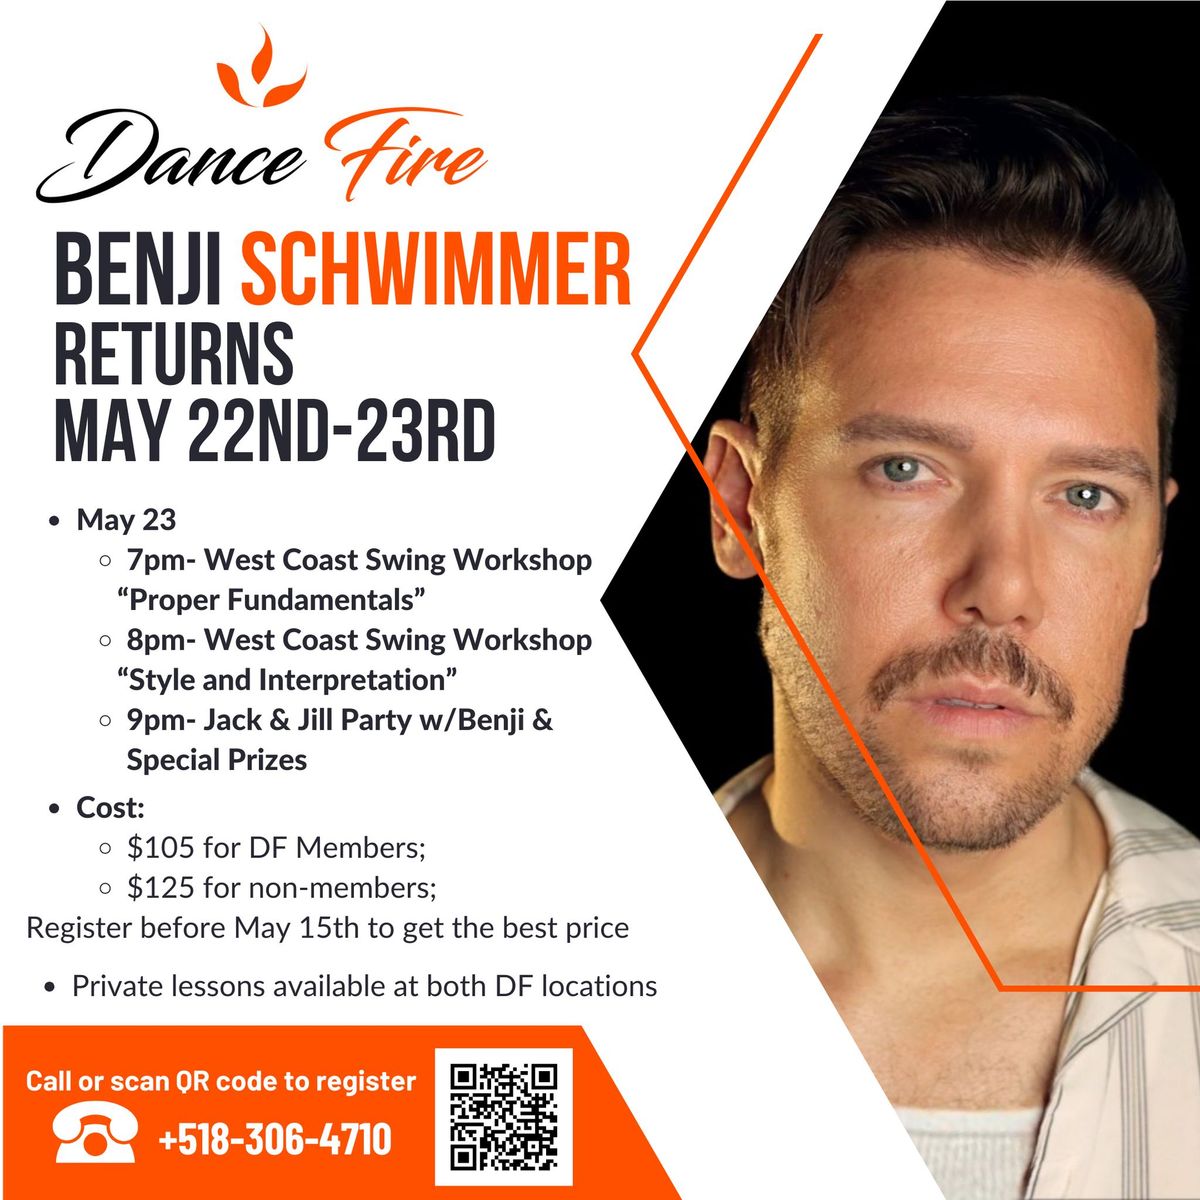 West Coast Swing Workshops and Jack & Jill Party with Benji Schwimmer